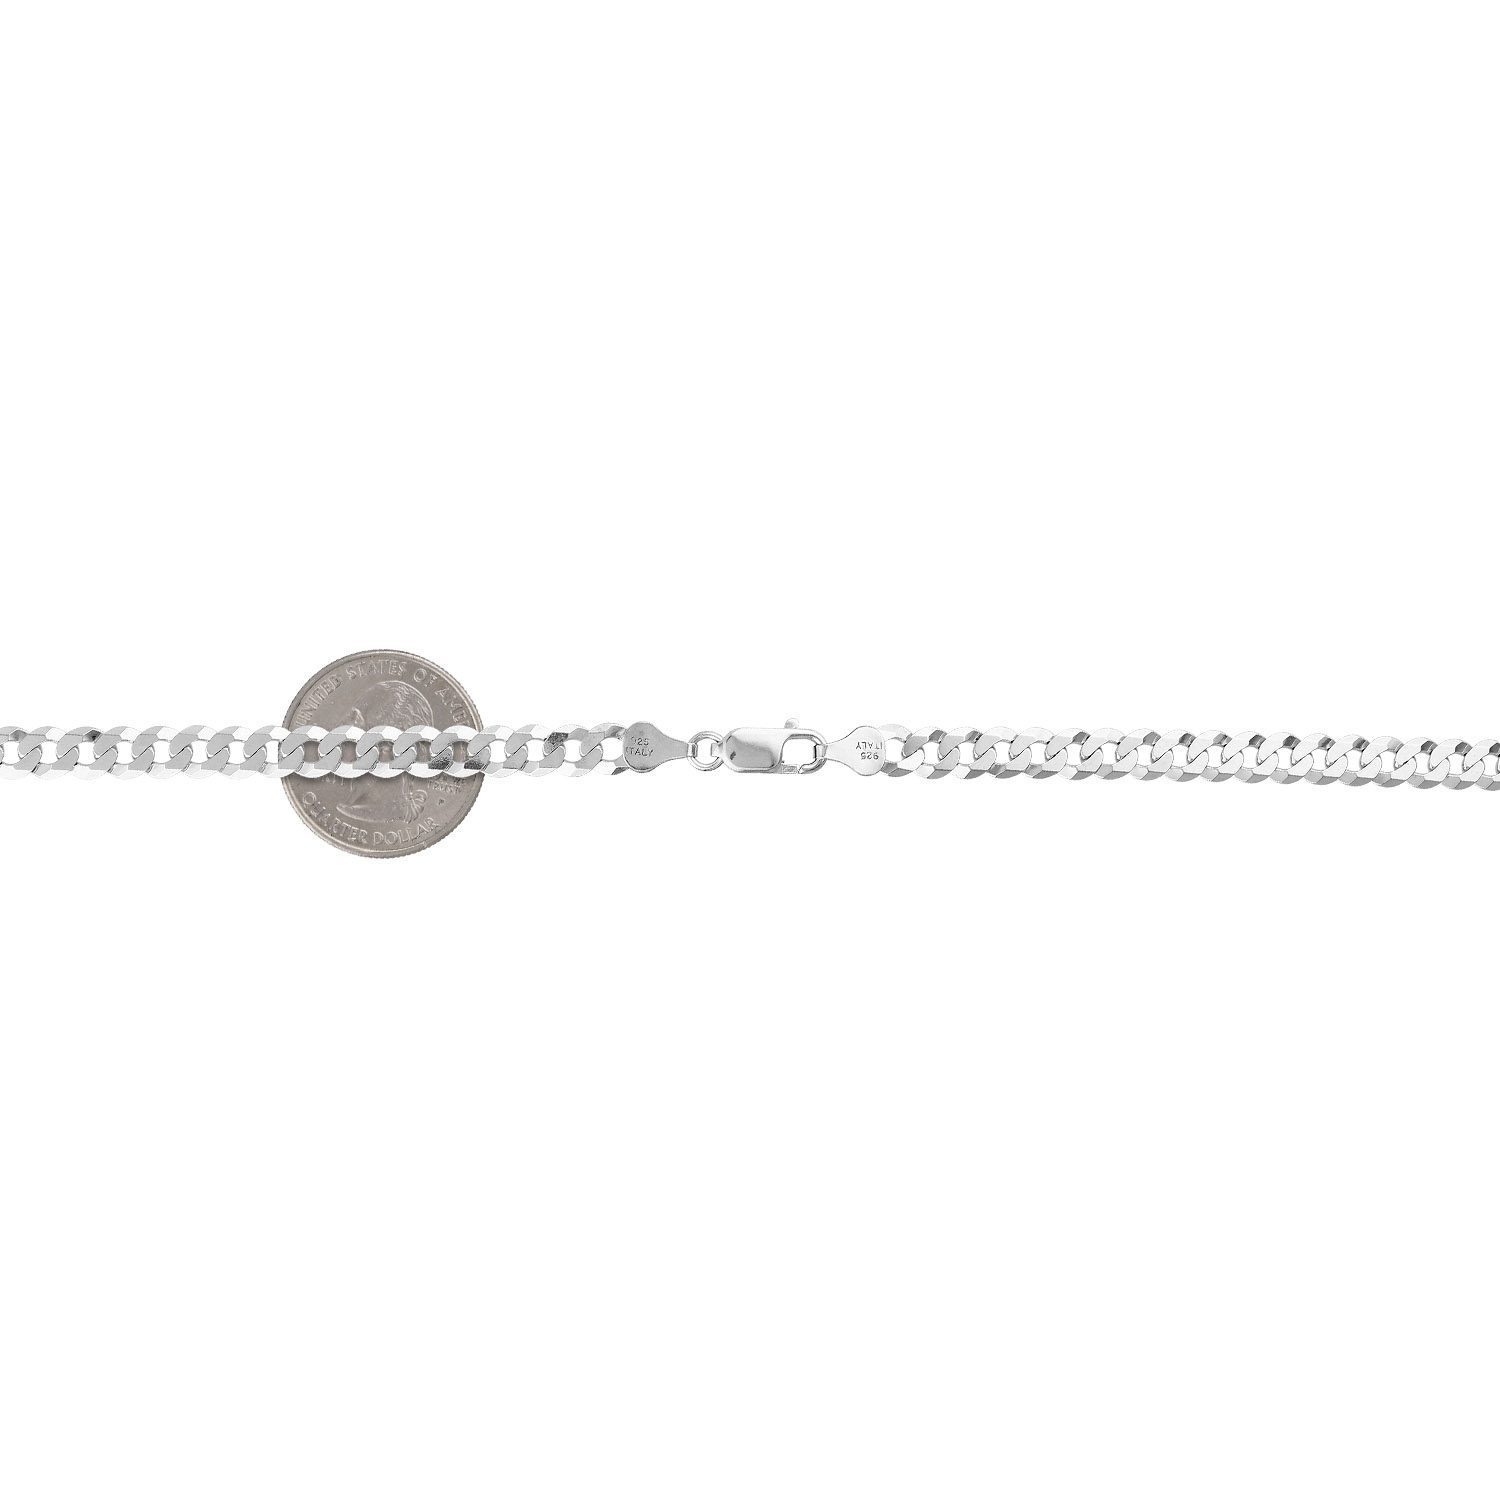 23.6 inch State Of Louisiana Chain Necklace - Silver